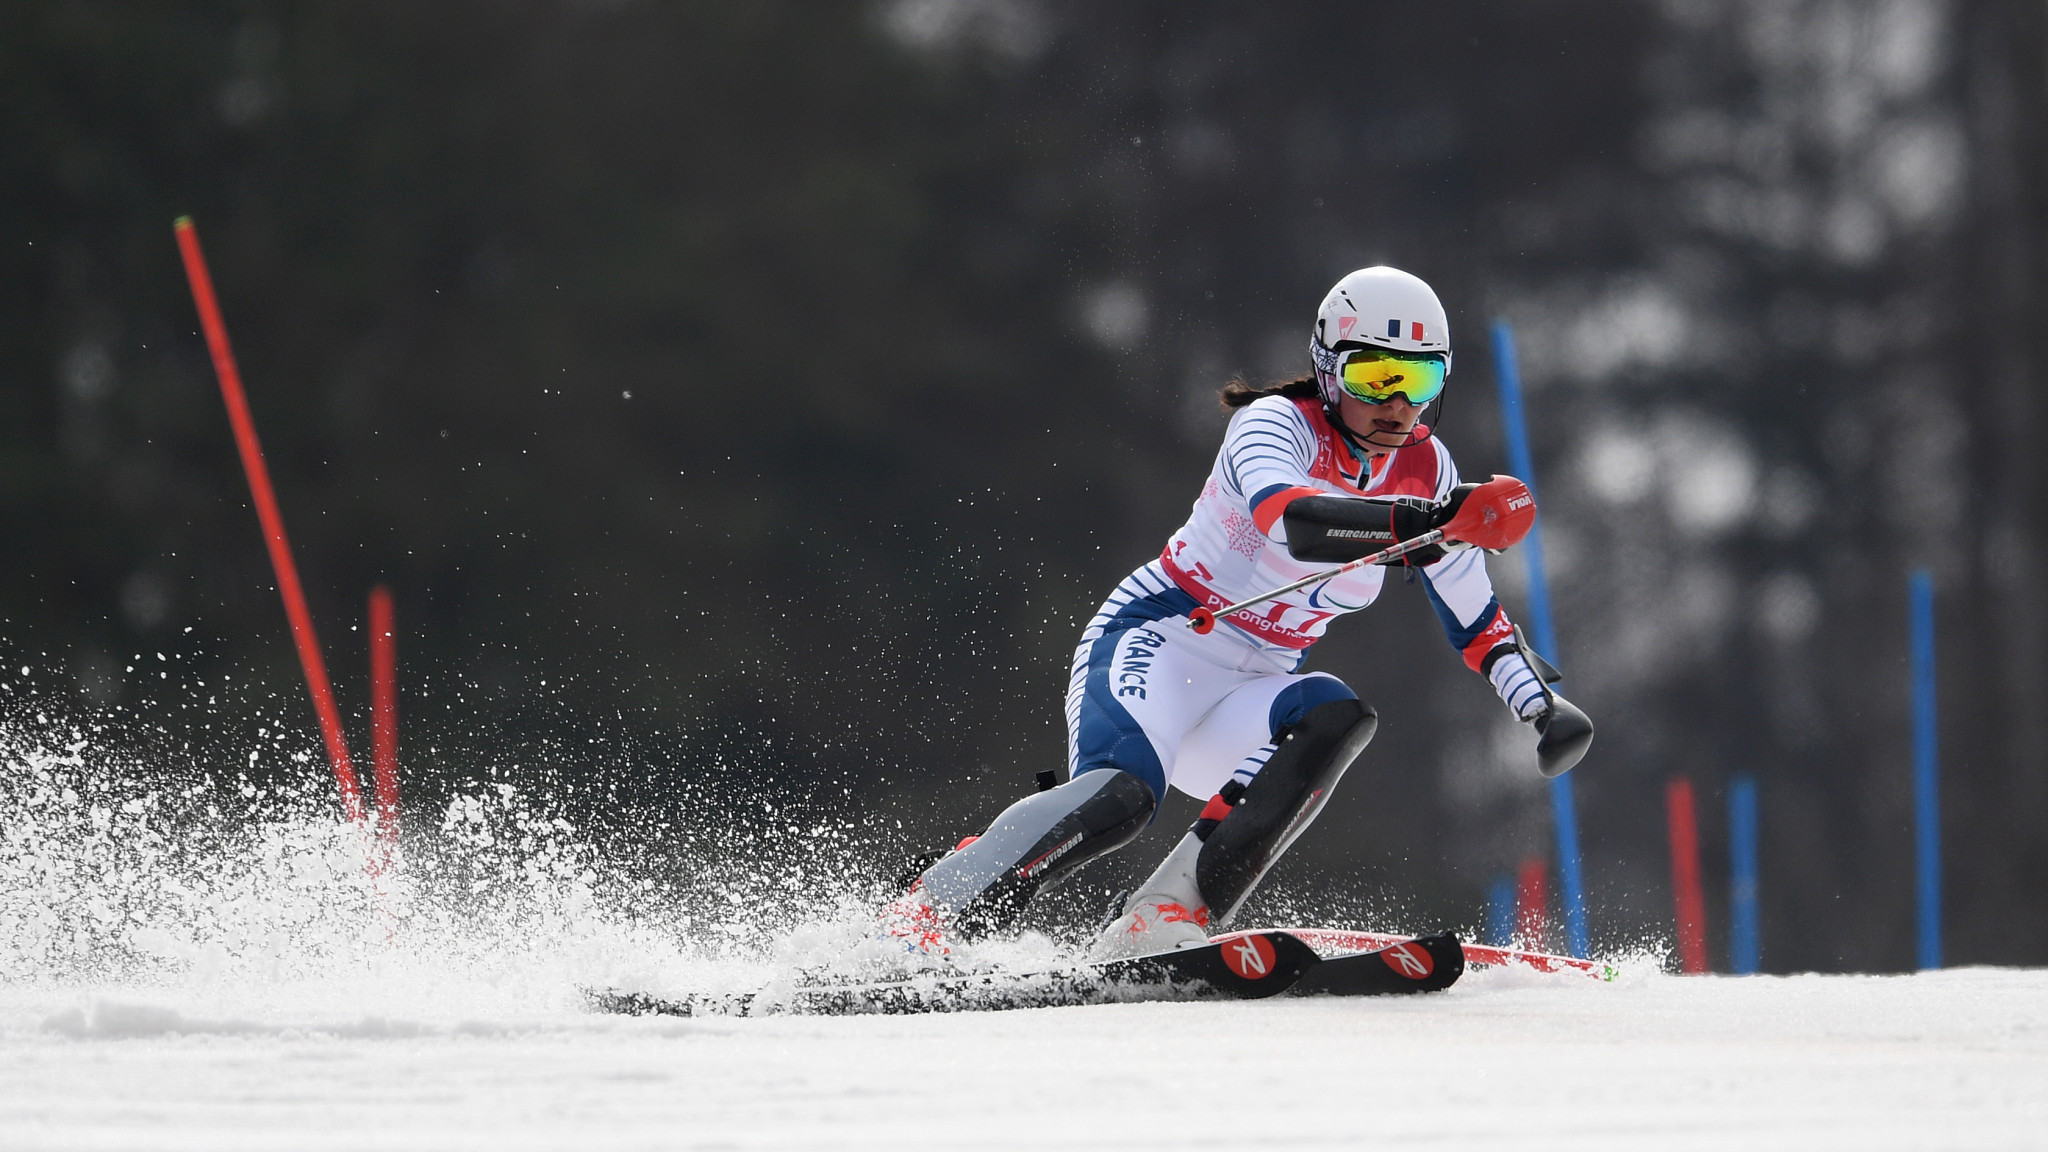 Bochet claims fifth gold as World Para Alpine Skiing Championships ends